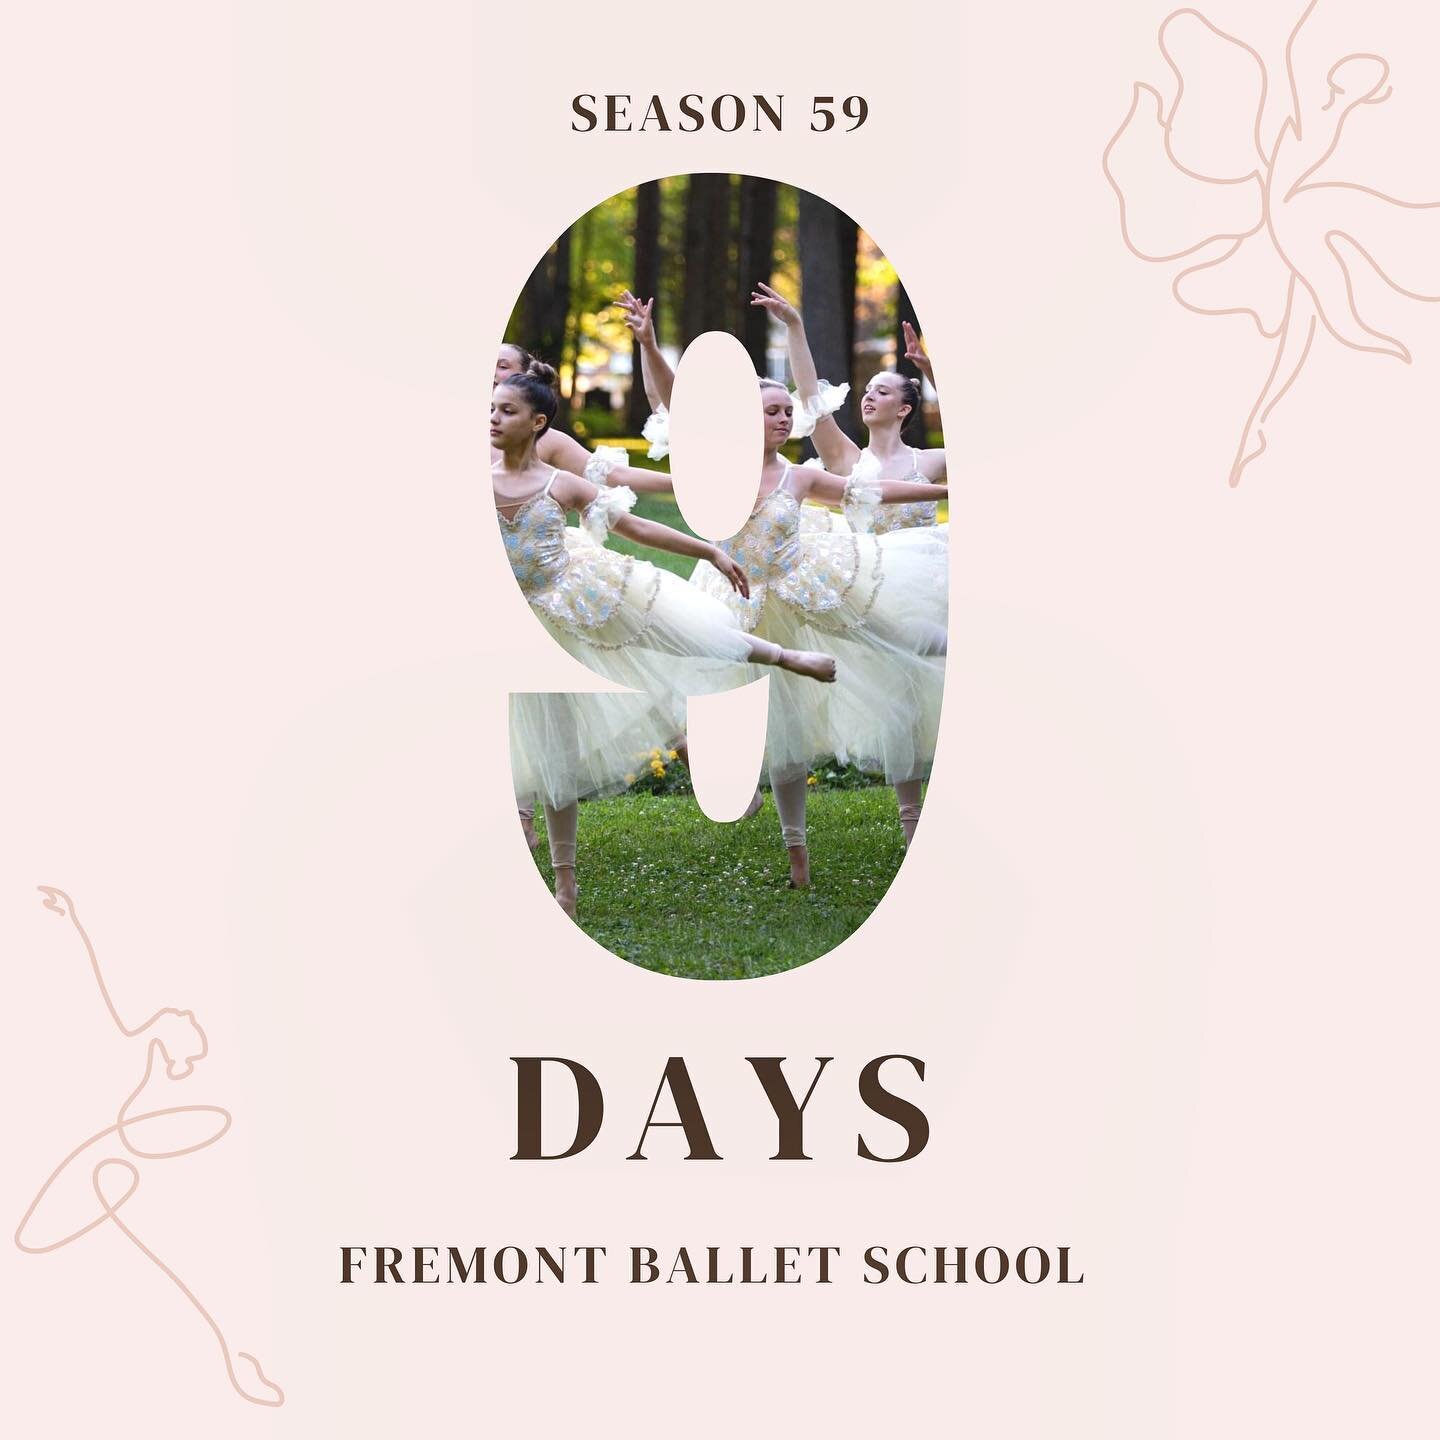 ✨ The countdown is on! 9️⃣ days until season 59. Are you ready to dance? 

#FremontBalletSchool #fremontohio #fremontohiodance #dance #ballet